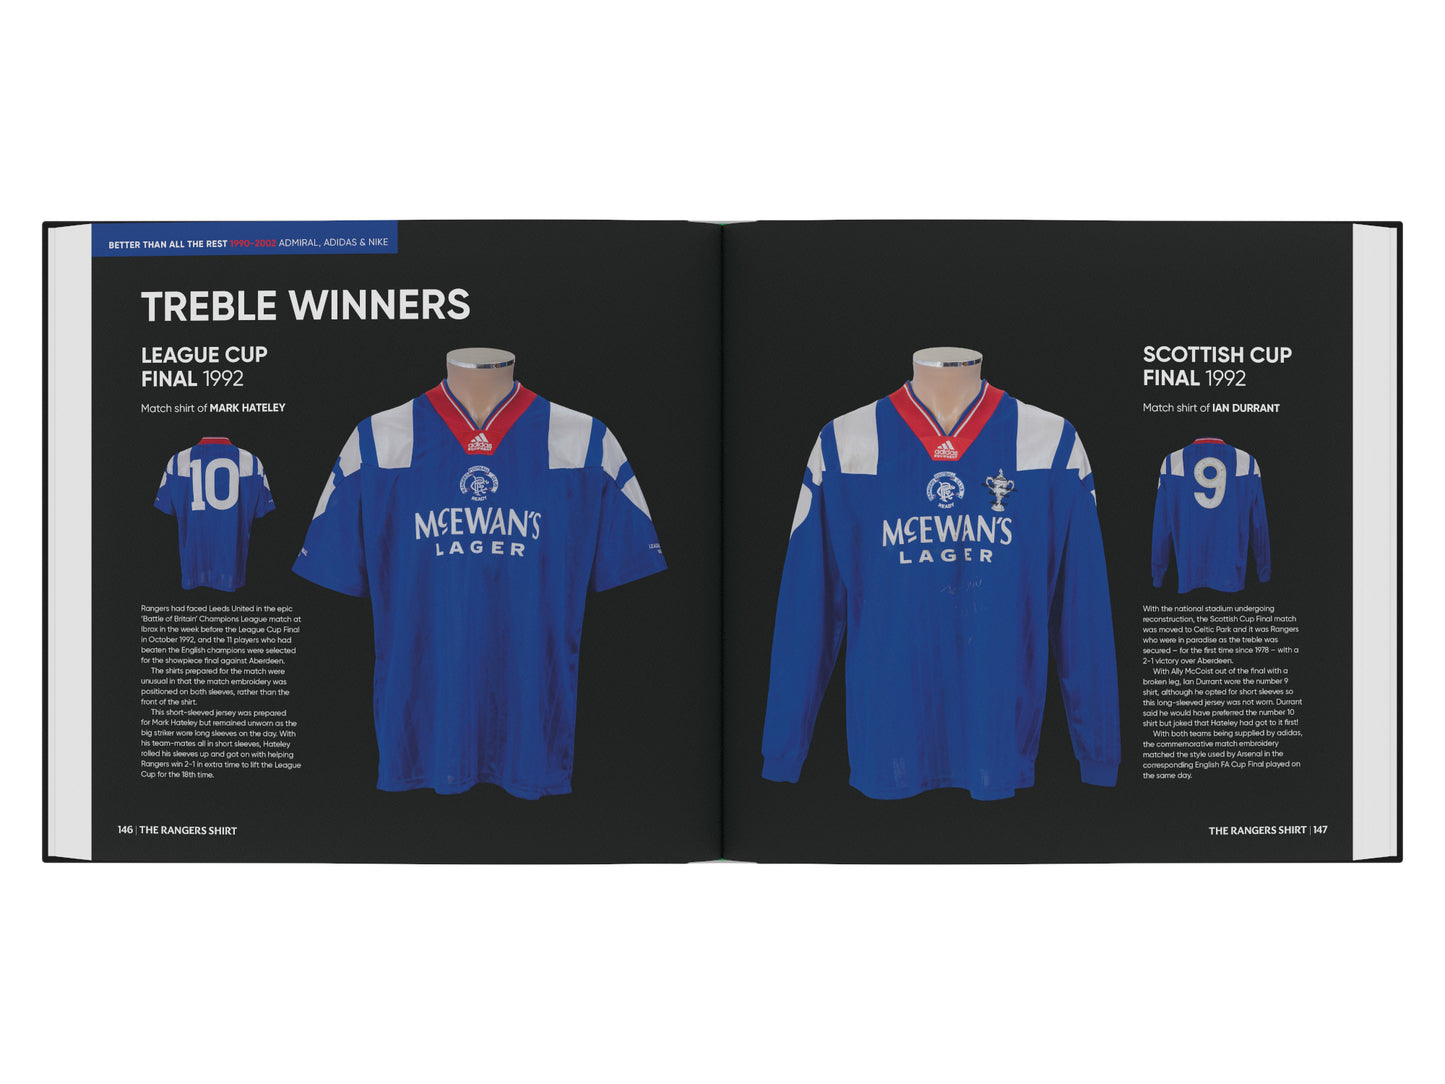 The Rangers Shirt - 2nd edition